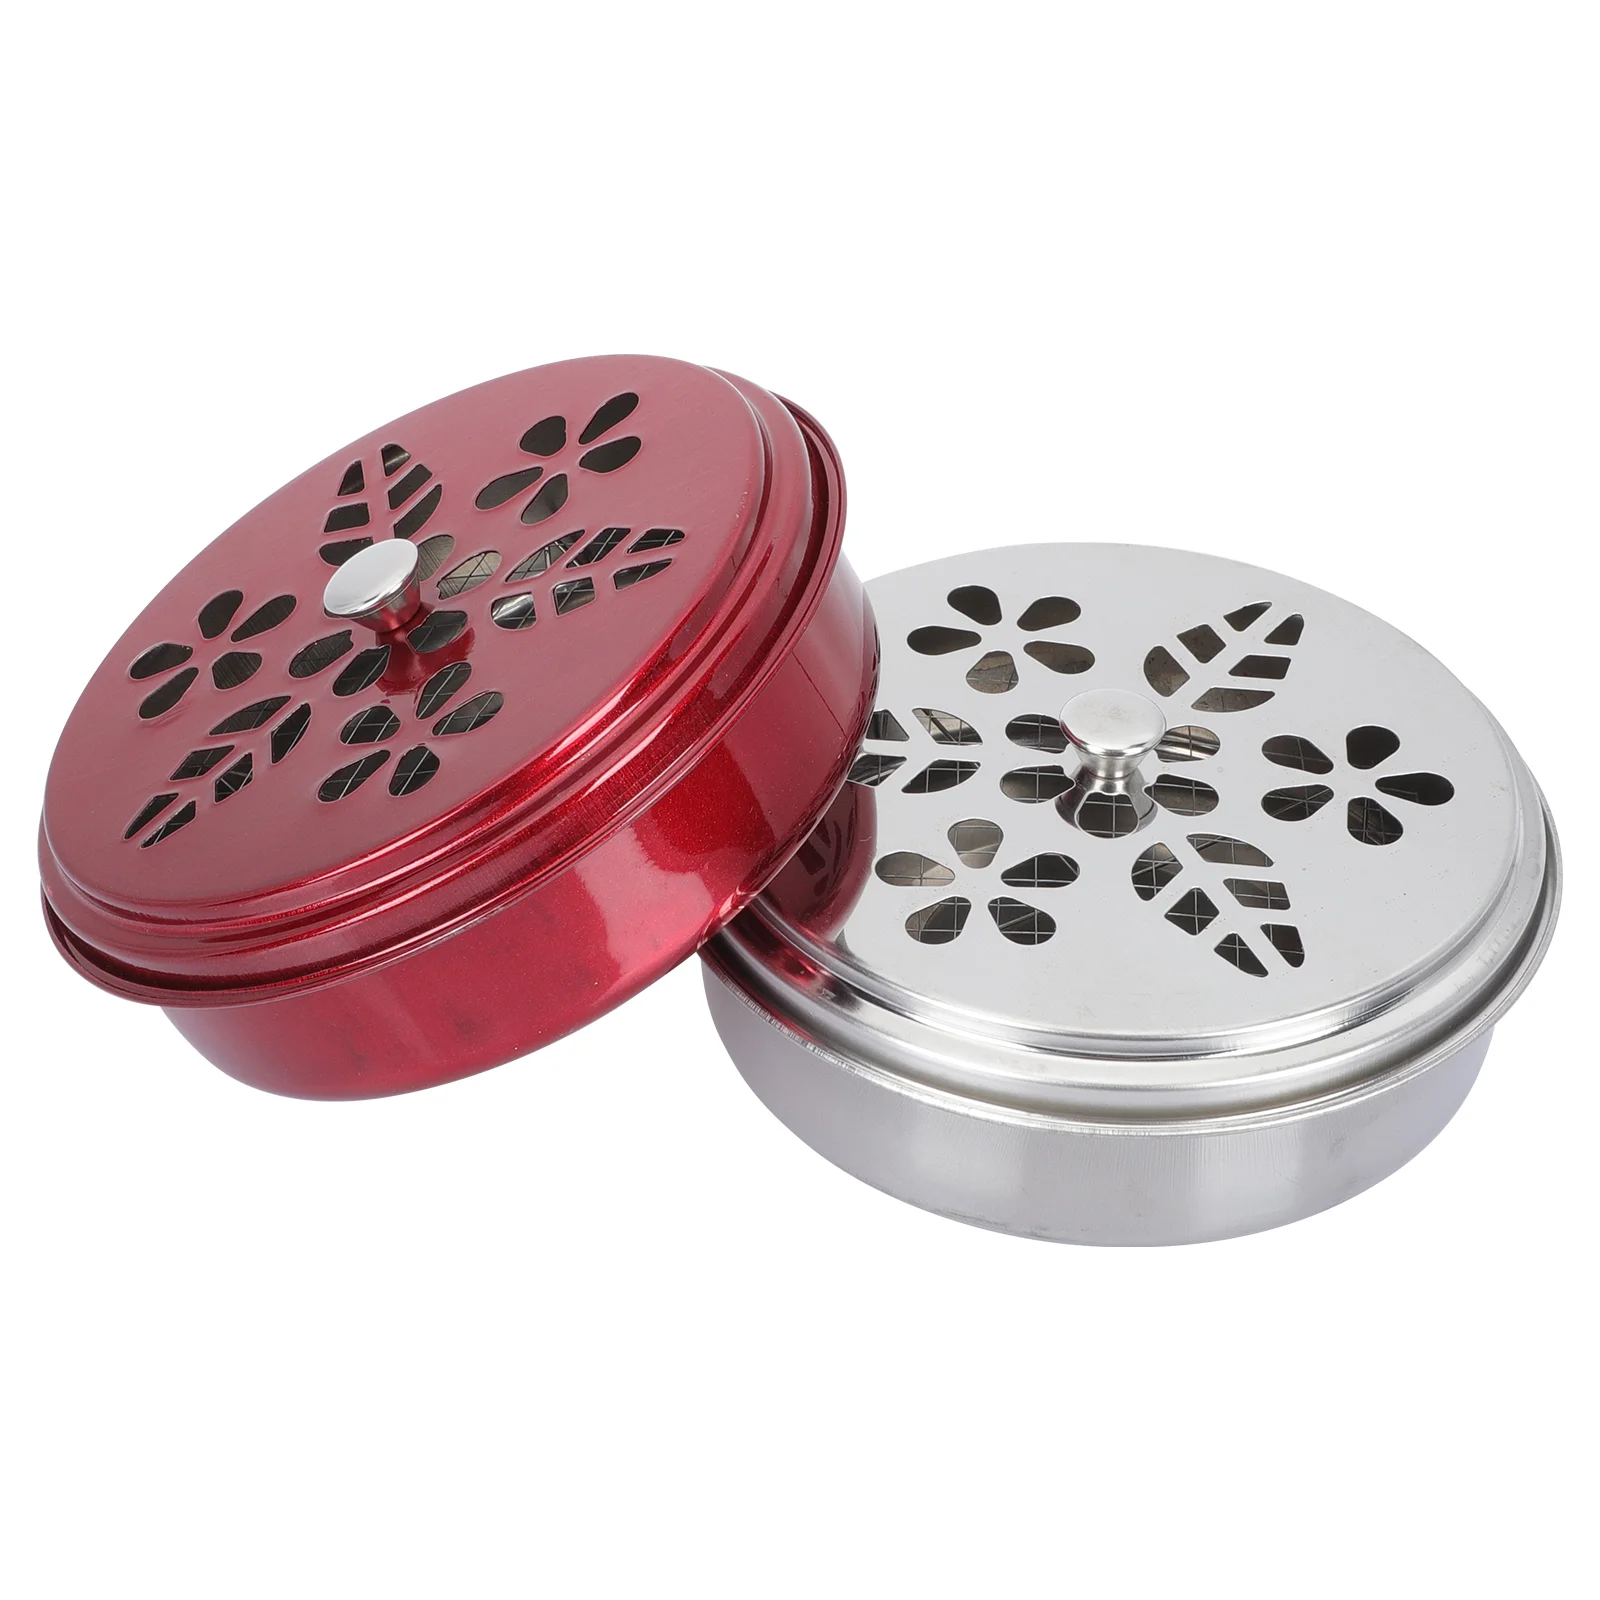 

Coil Mosquito Holder Incense Burner Box Tray Spiral Iron Metal Sandalwood Censer Fragrance Portable Hollow Tin Cage Container